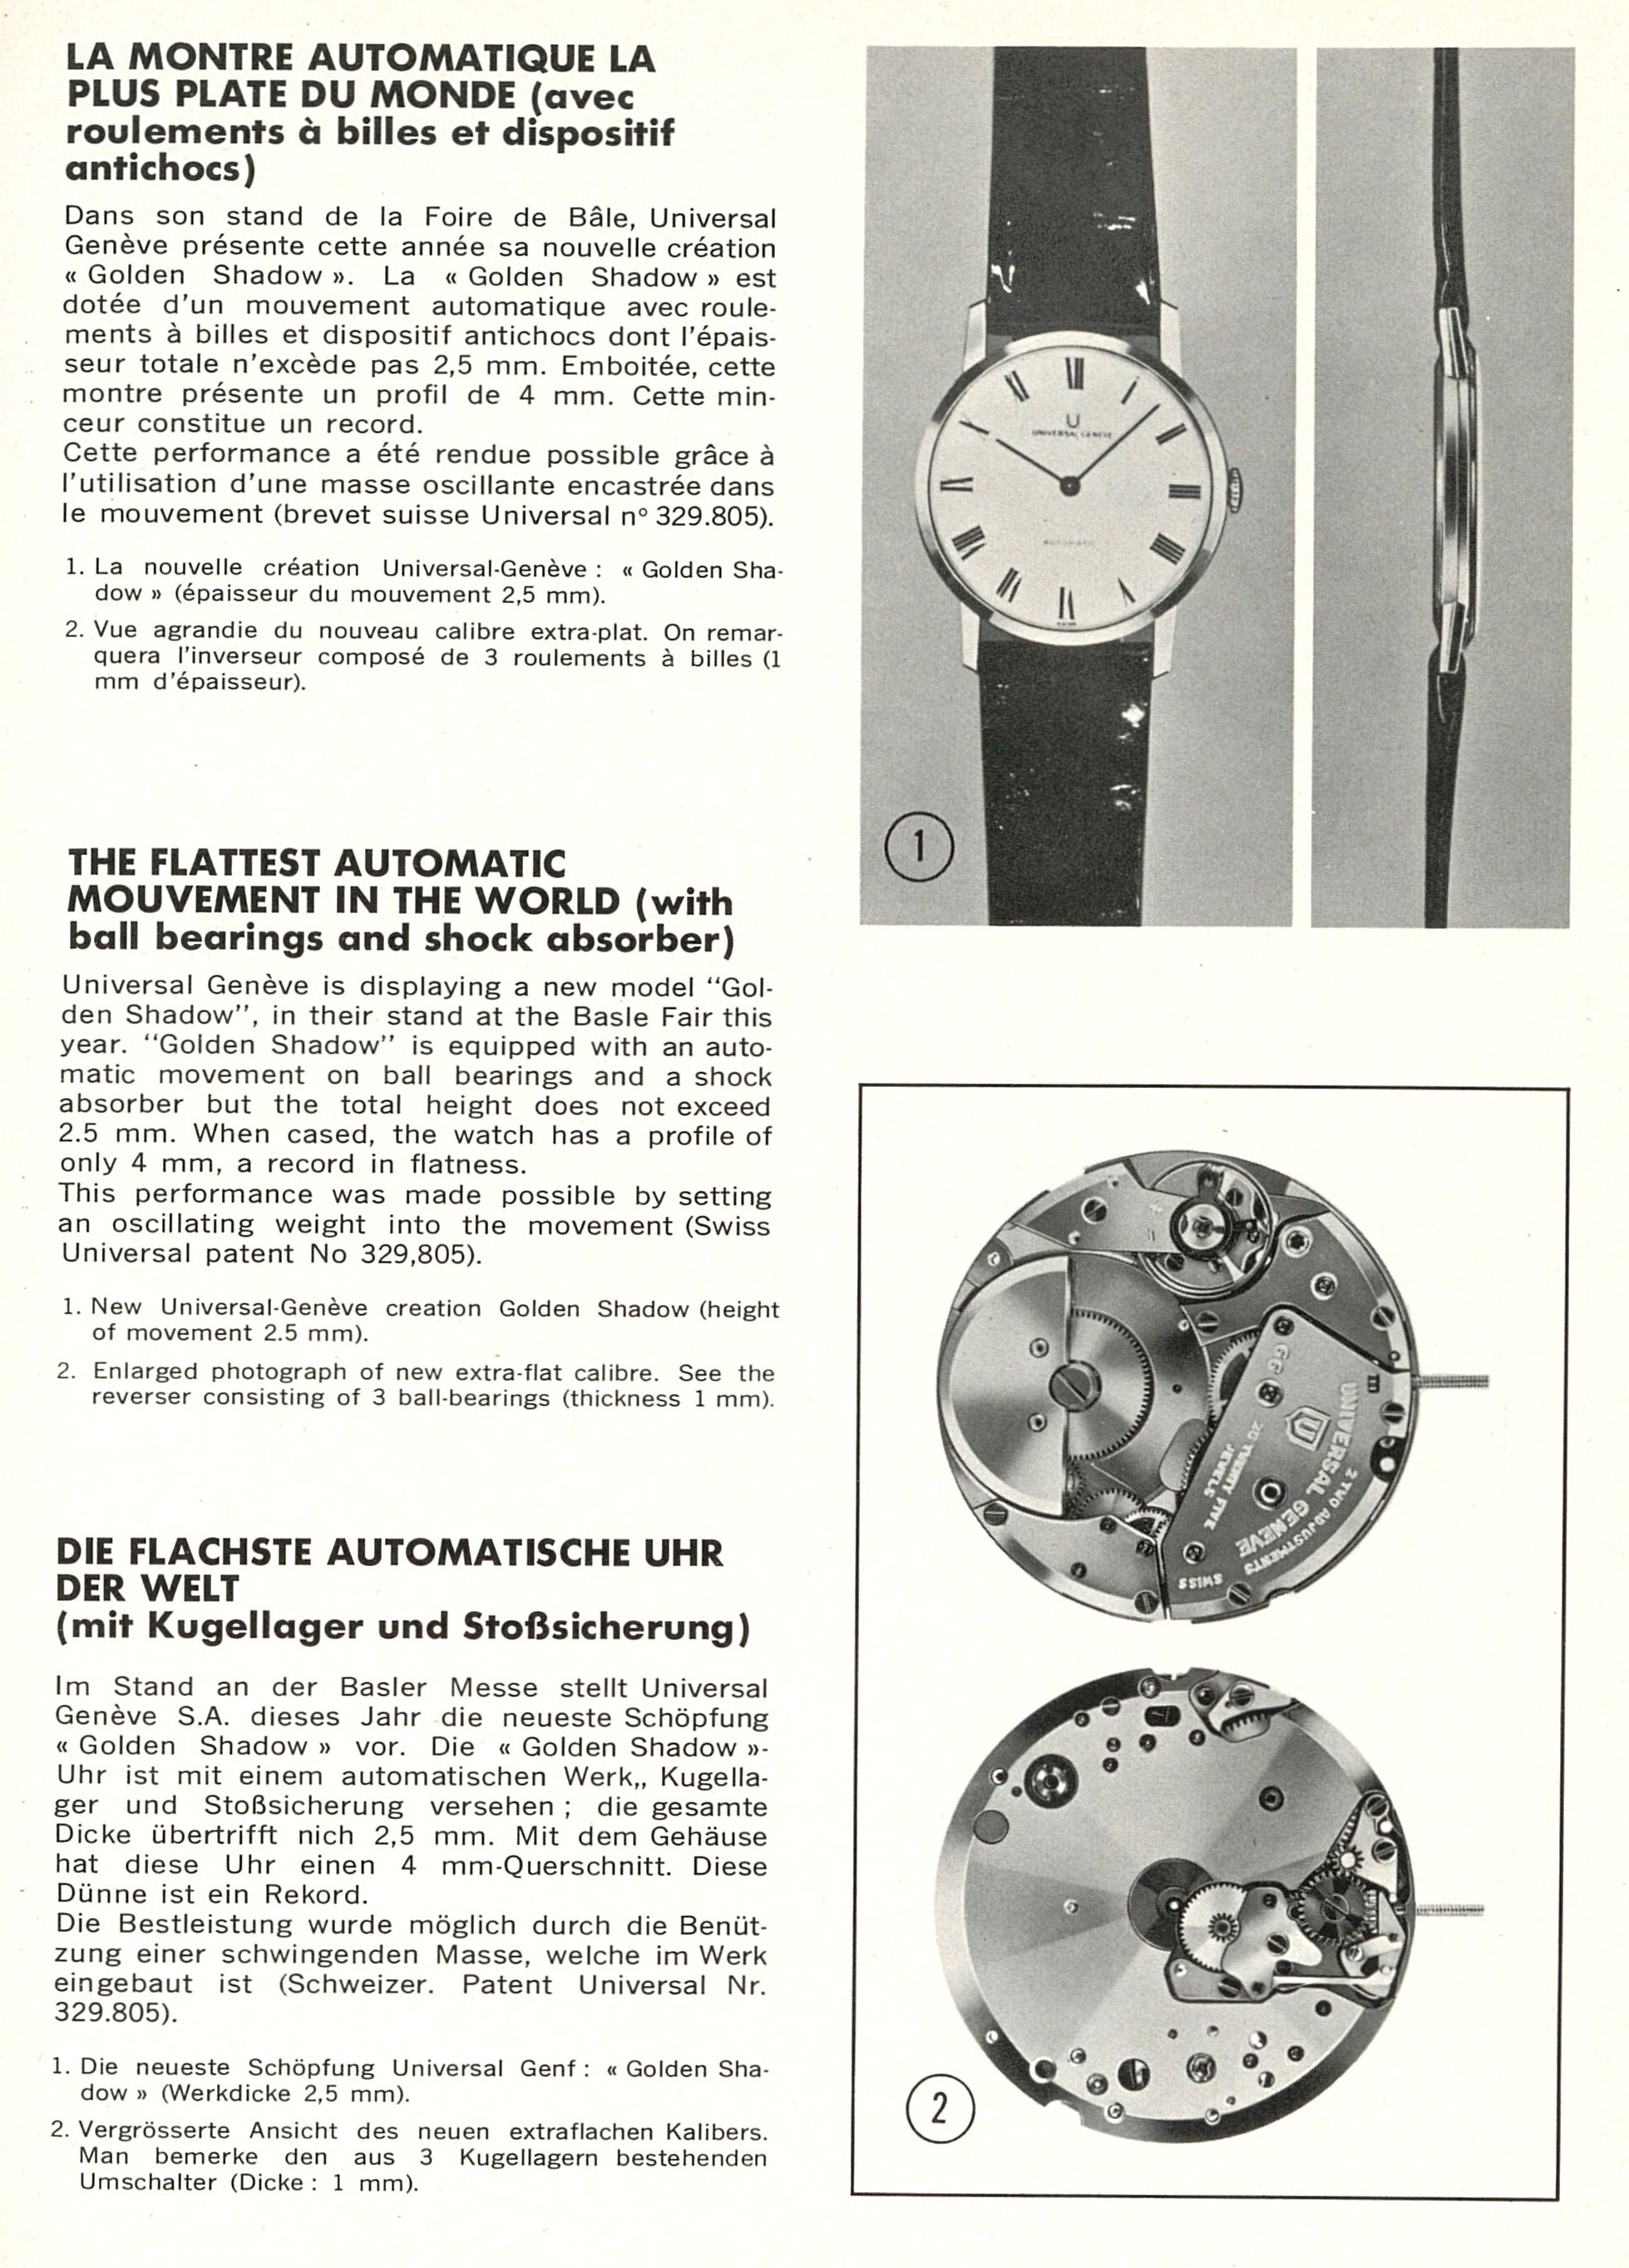 09_Universal_Geneve_advertising_for_the_Golden_Shadow_watch_published_in_Europa_Star_in_1966 Breitling adquiere Universal Genève